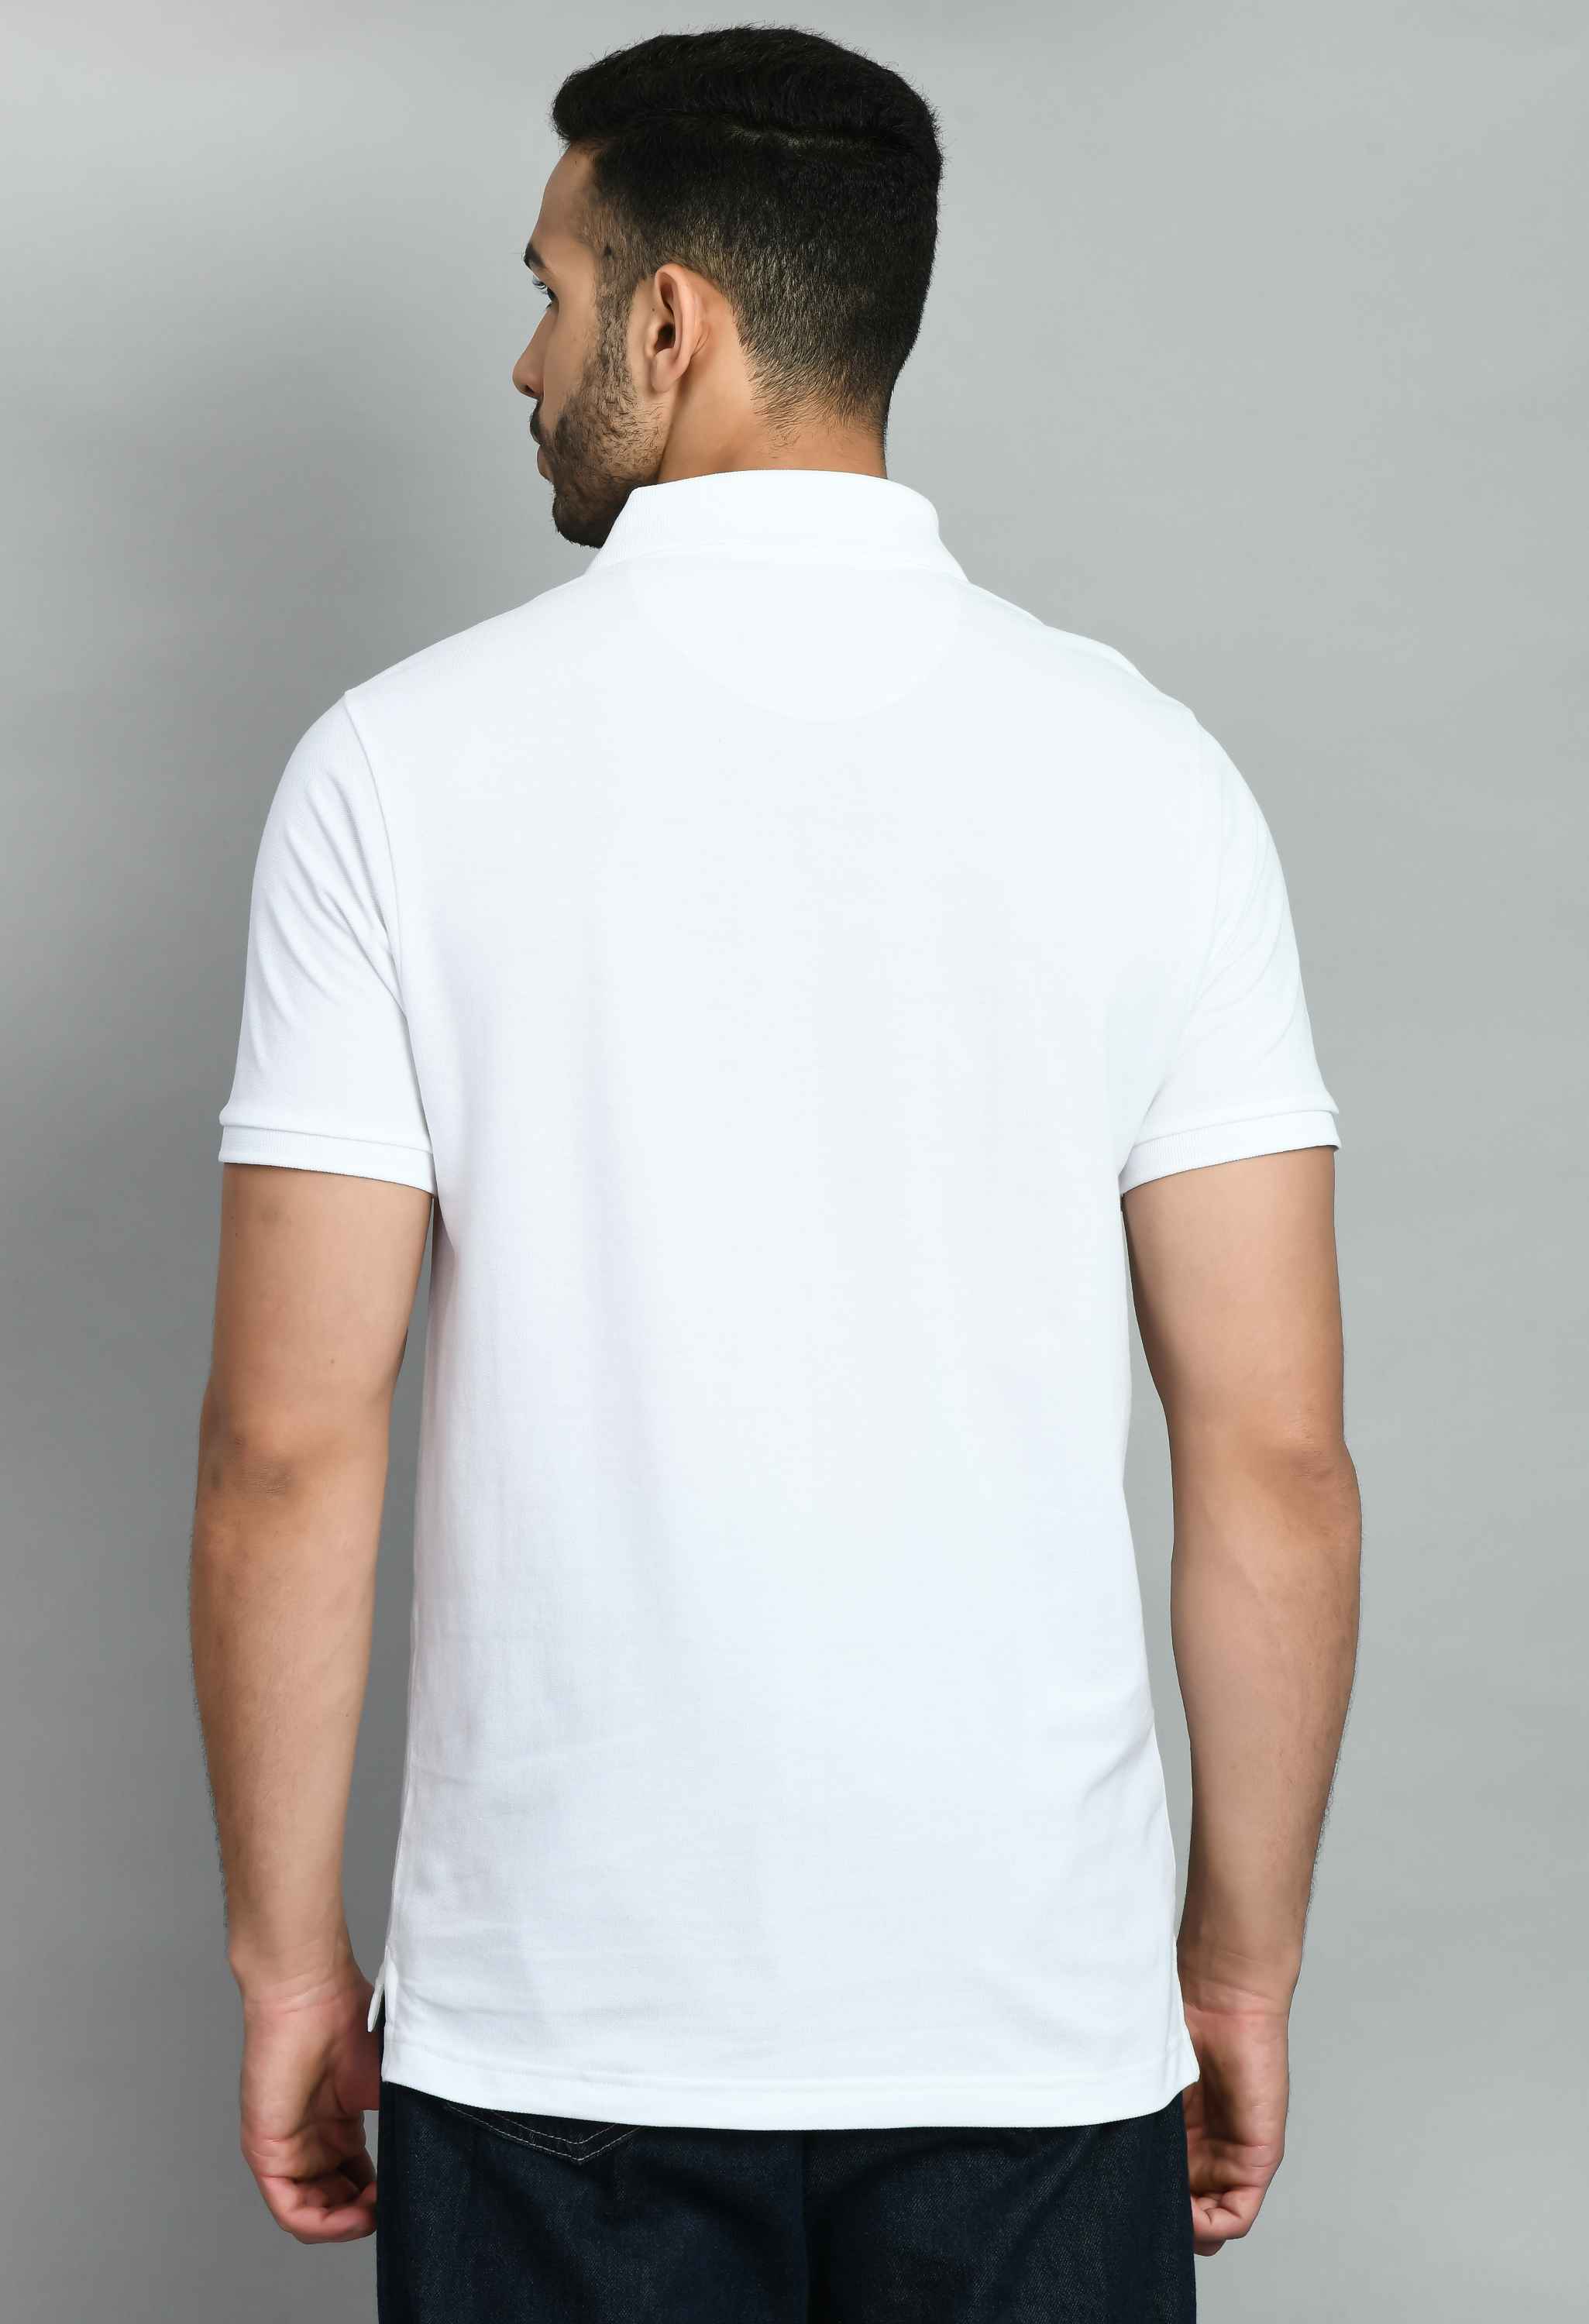 Men's Solid White Polo T-Shirt - SQUIREHOOD